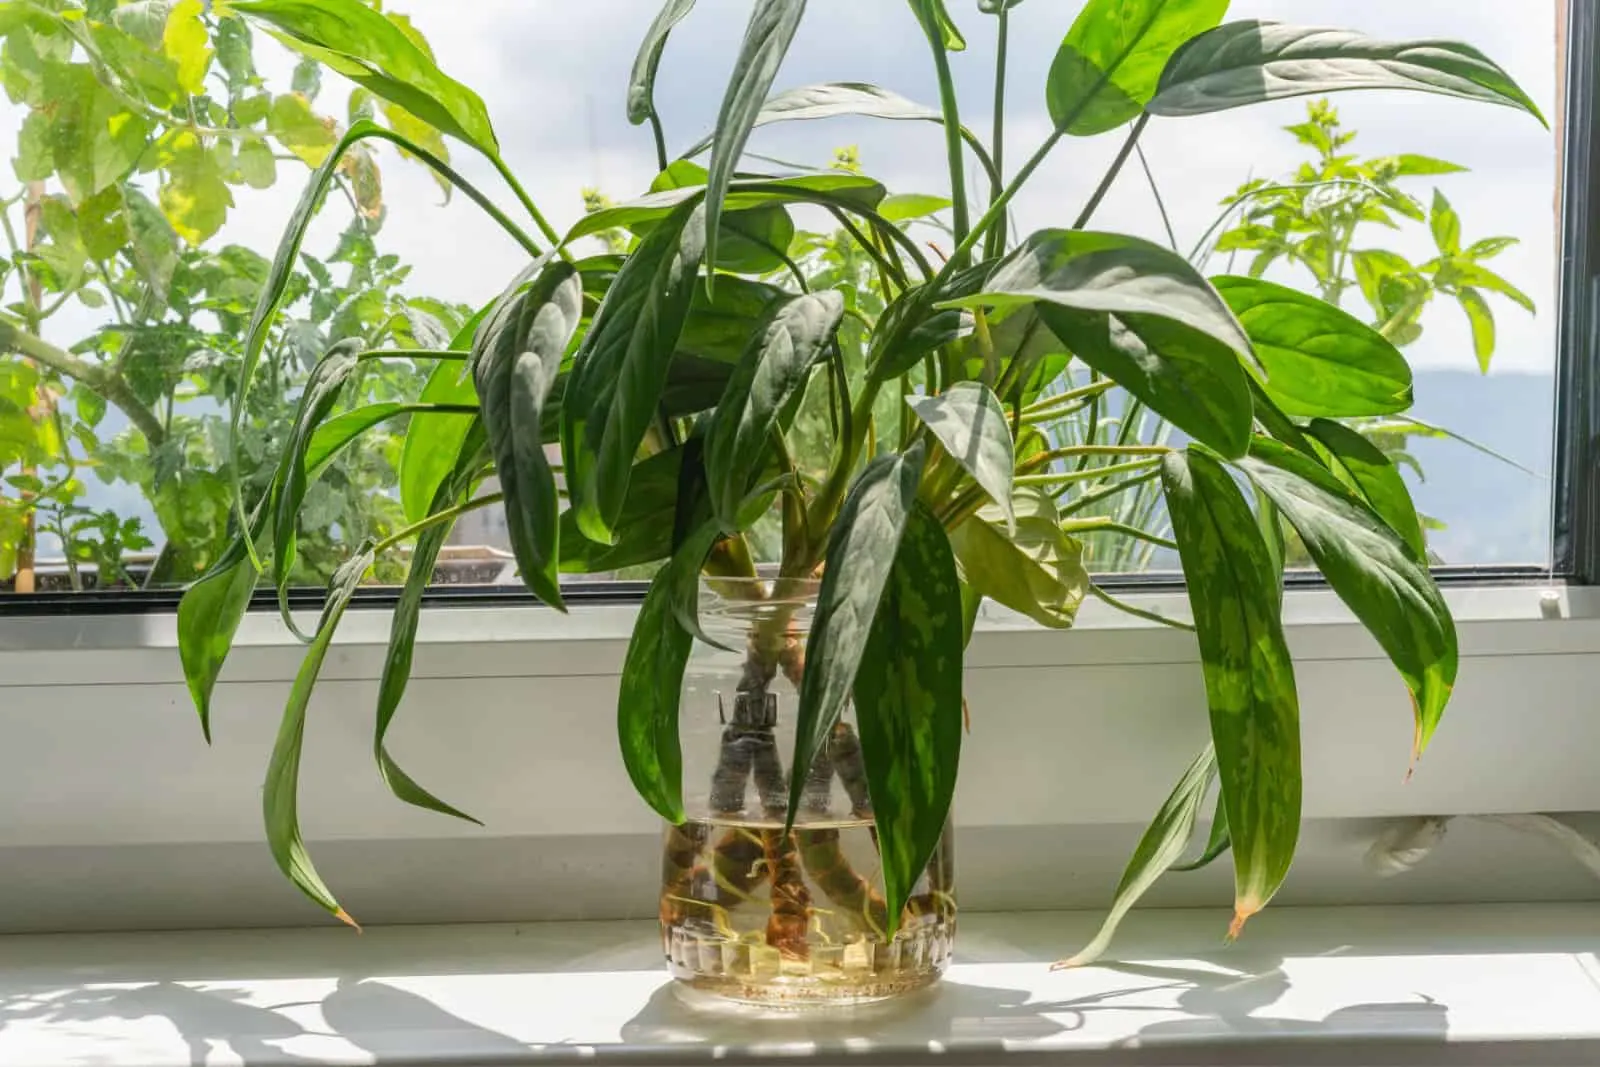 House plant aglaonema in water on window sill indoors.